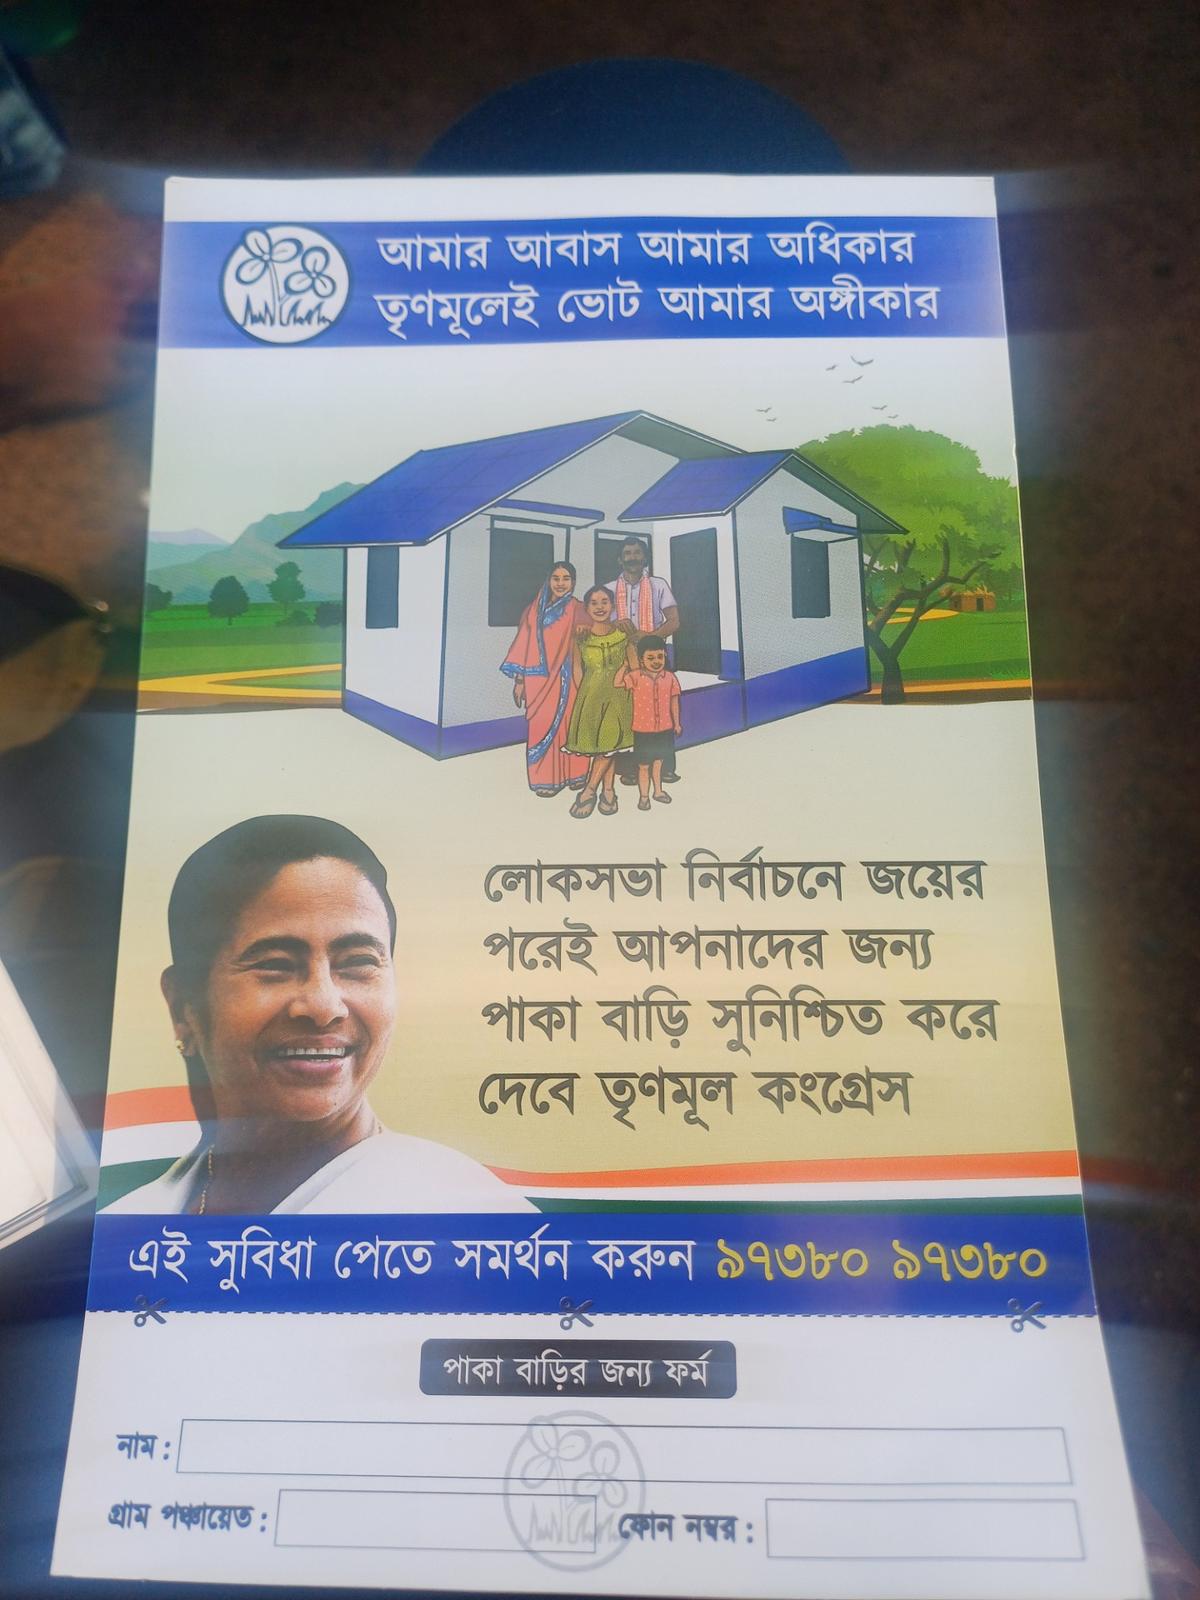 The handbill of TMC promising new houses to villagers.